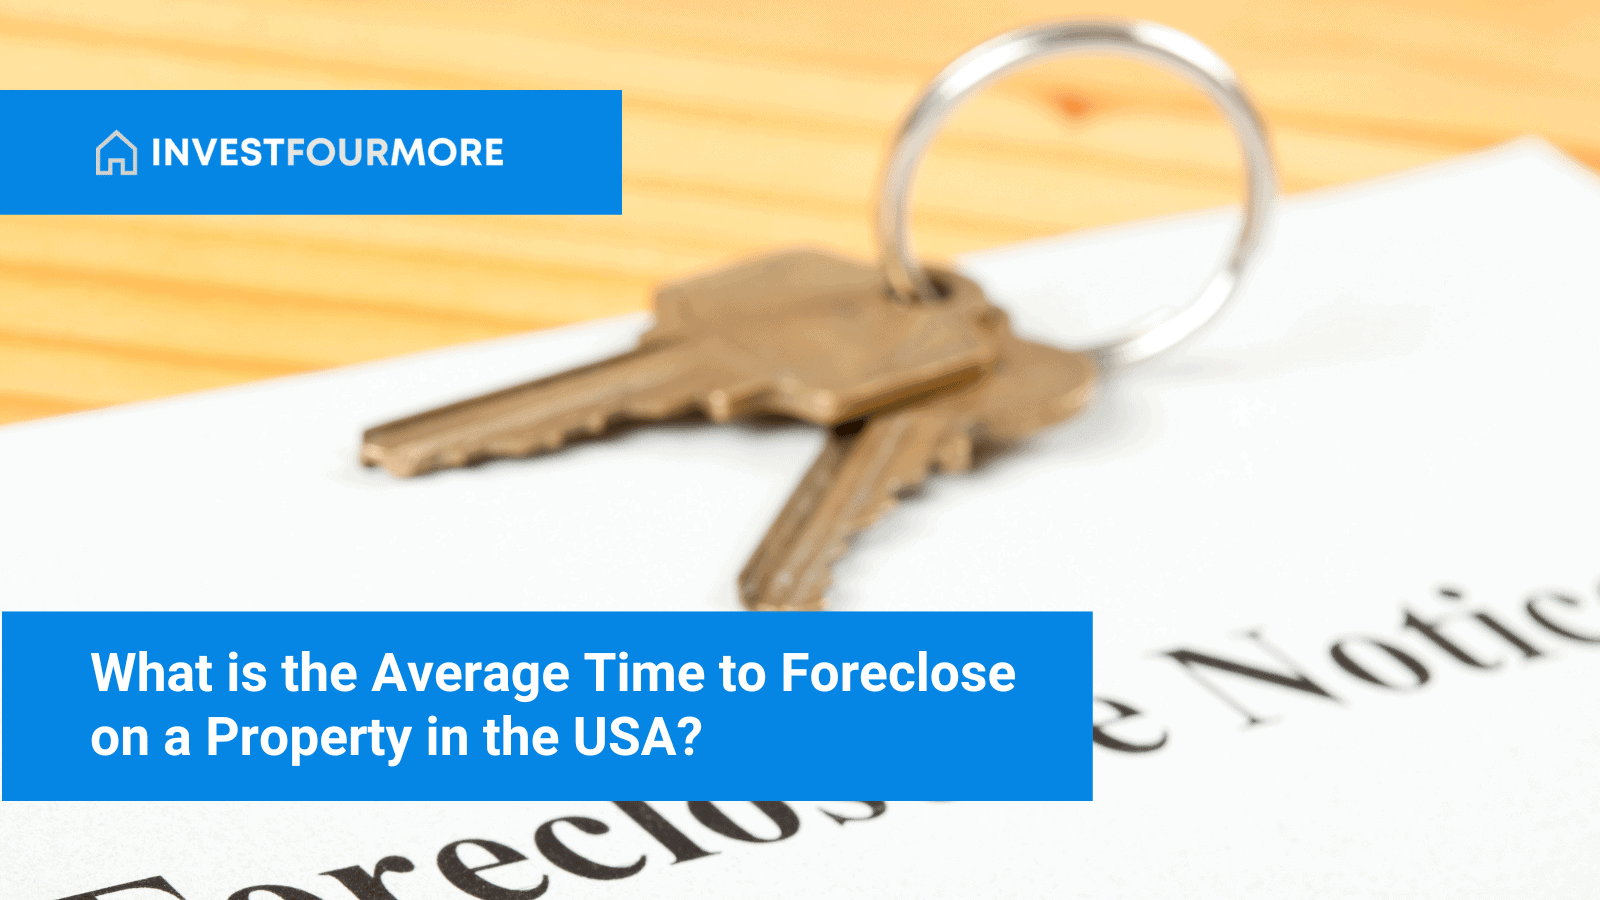 What is the Average Time to Foreclose on a Property in the USA?